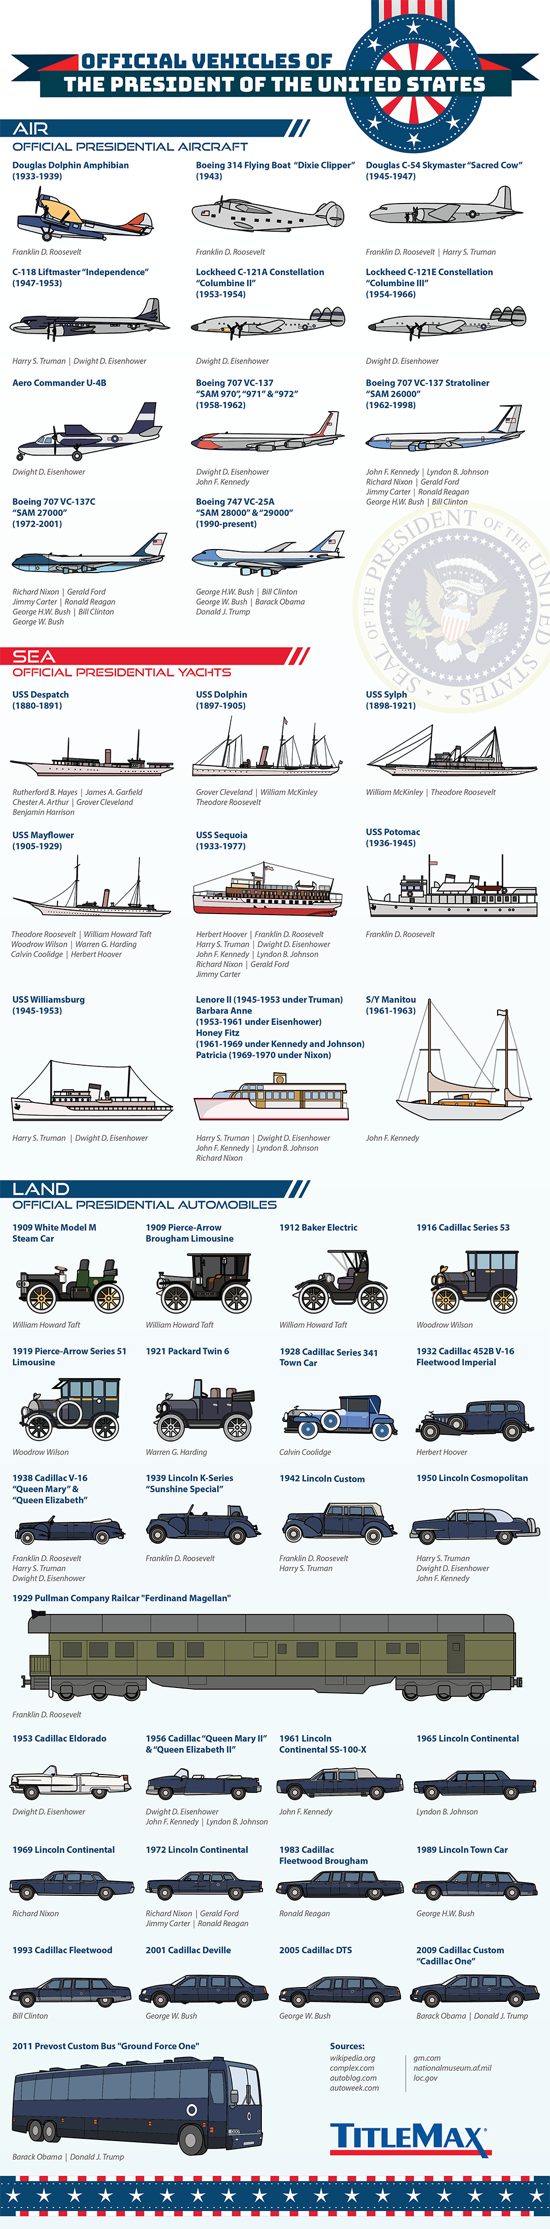 Official Vehicles of the President of the United States – TitleMax.com – Infographic